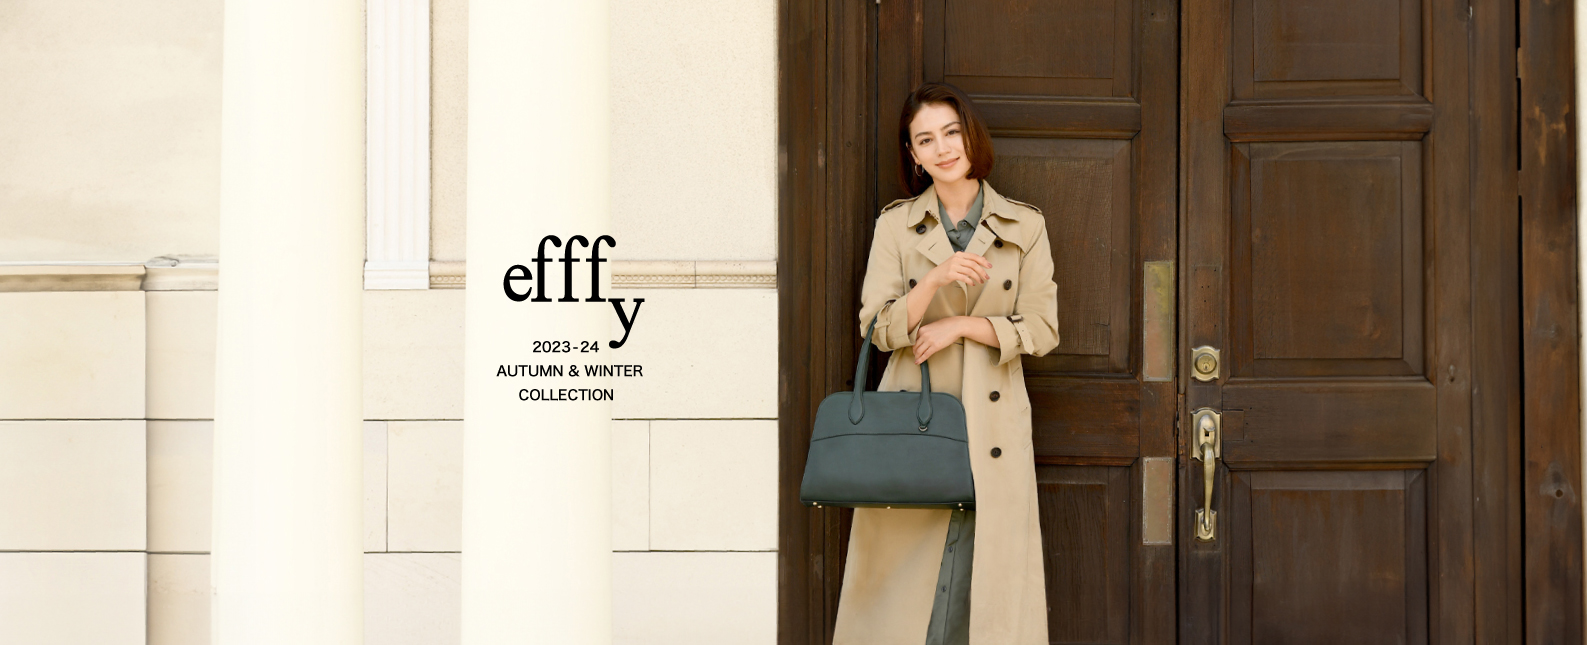 efffy 2023-24 AW collection